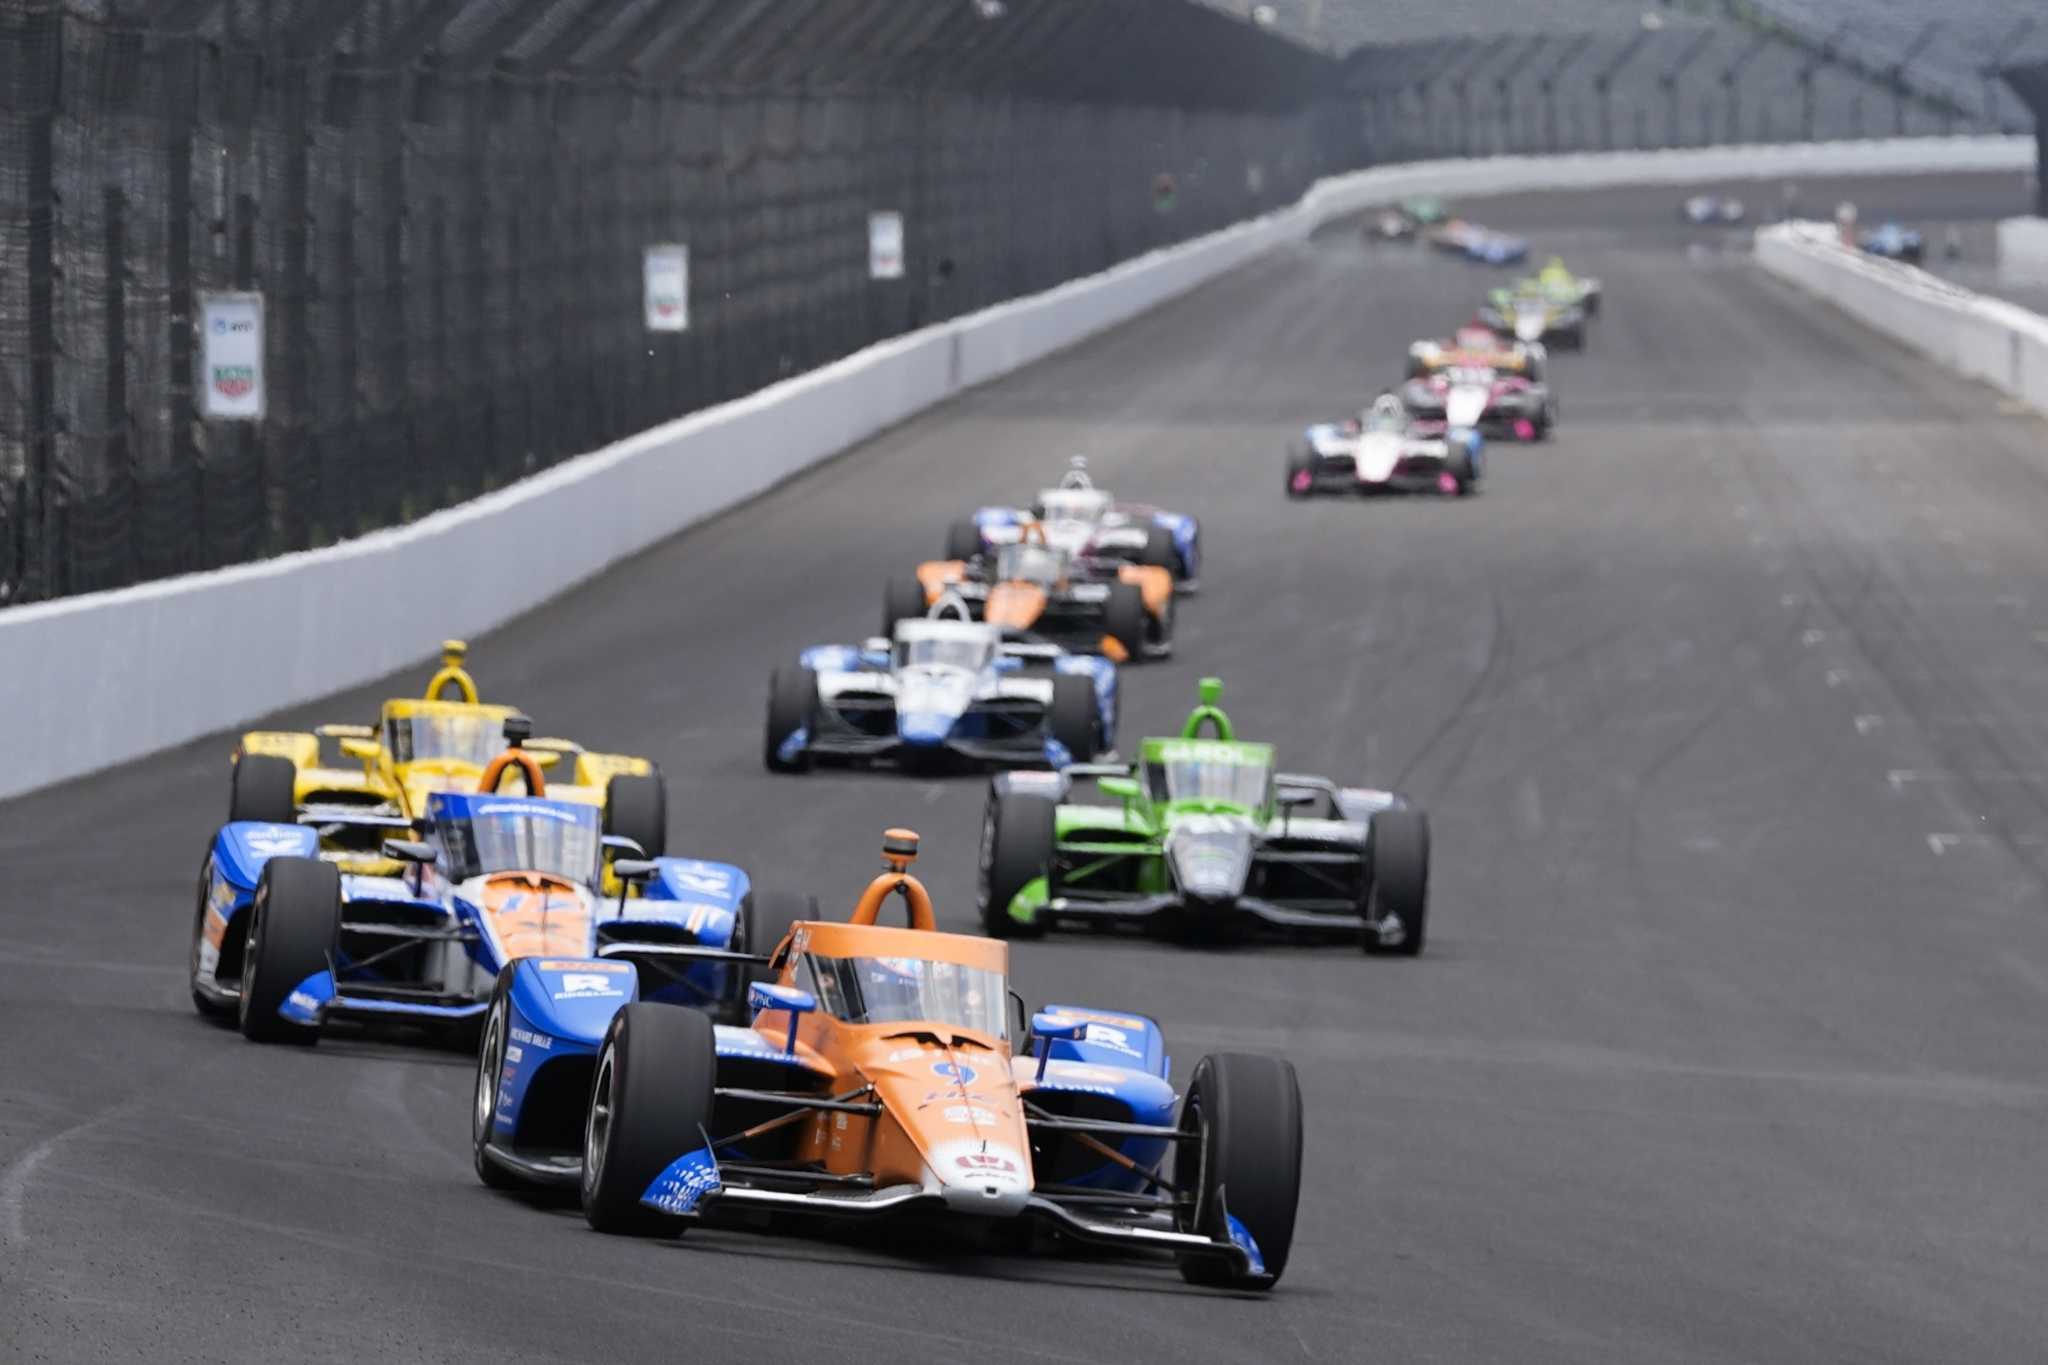 Indianapolis 500 race update